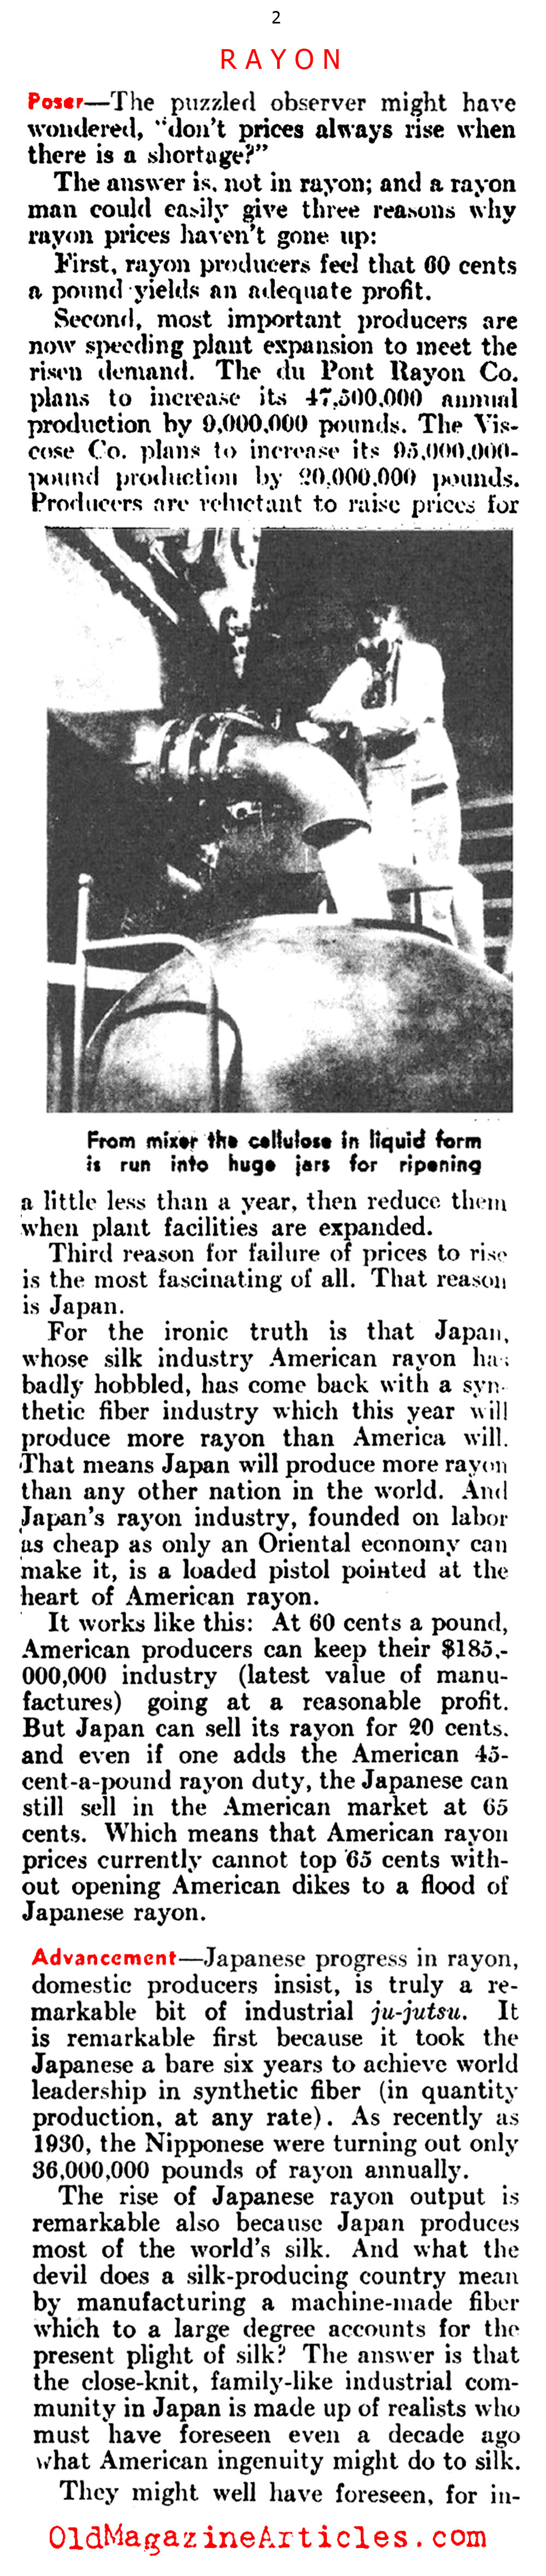 The Invention of Rayon (Literary Digest, 1937)